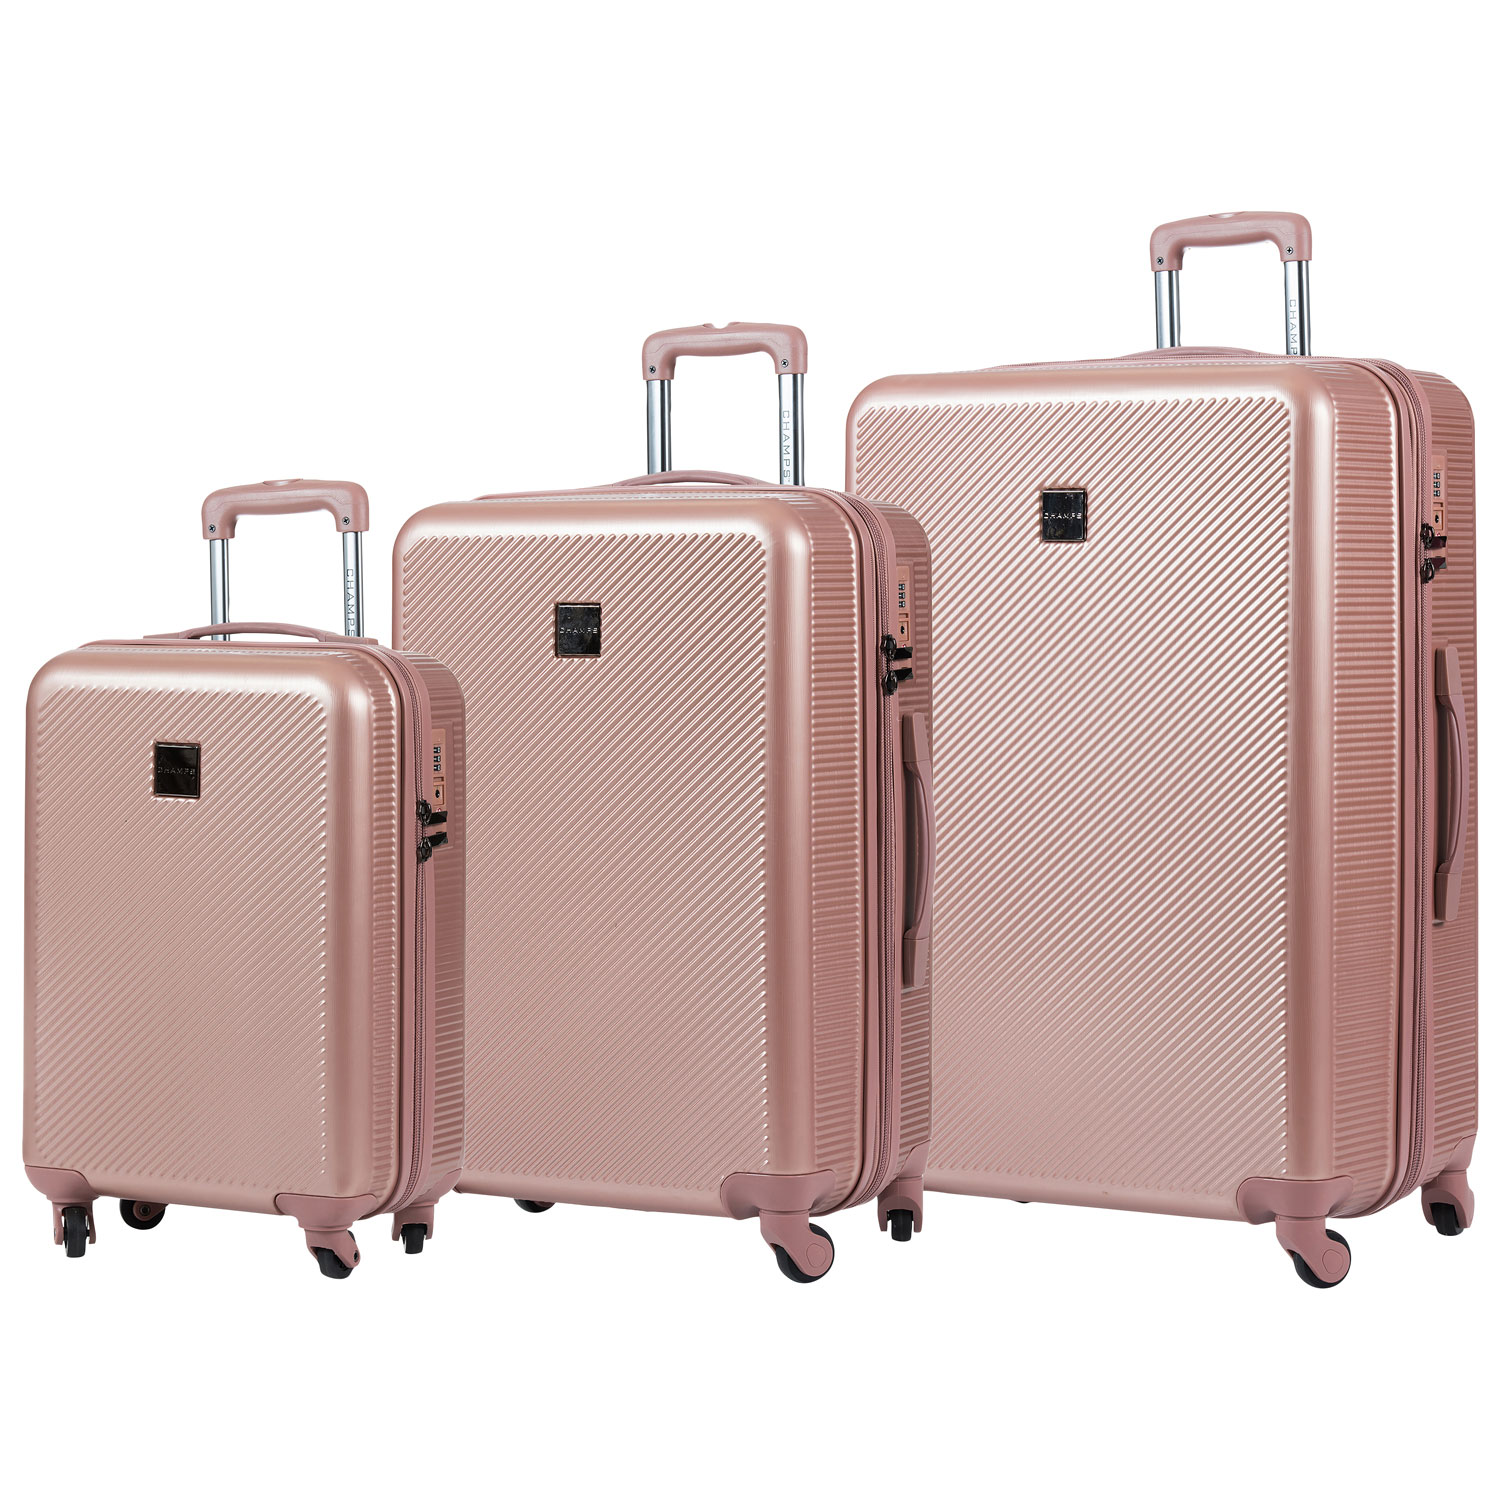 Champs Iconic Collection 3-Piece Hard Side Expandable Luggage Set - Rose Pink